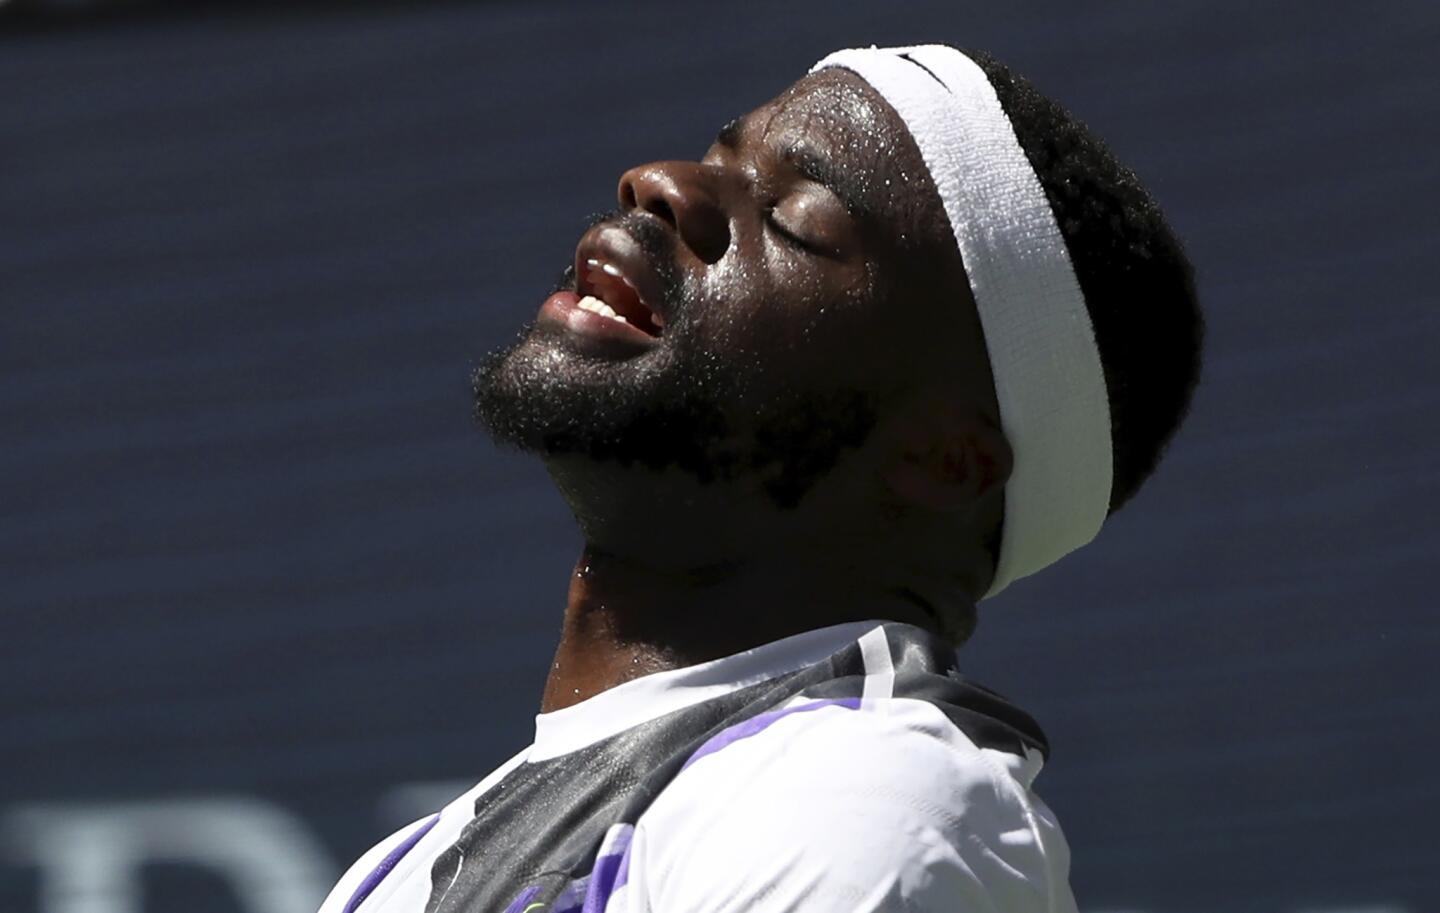 Frances Tiafoe reacts after losing a point to Alexander Zverev during the second round match on Day 4 of the 2019 U.S. Open at the USTA Billie Jean King National Tennis Center on Aug.29, 2019, in Queens.